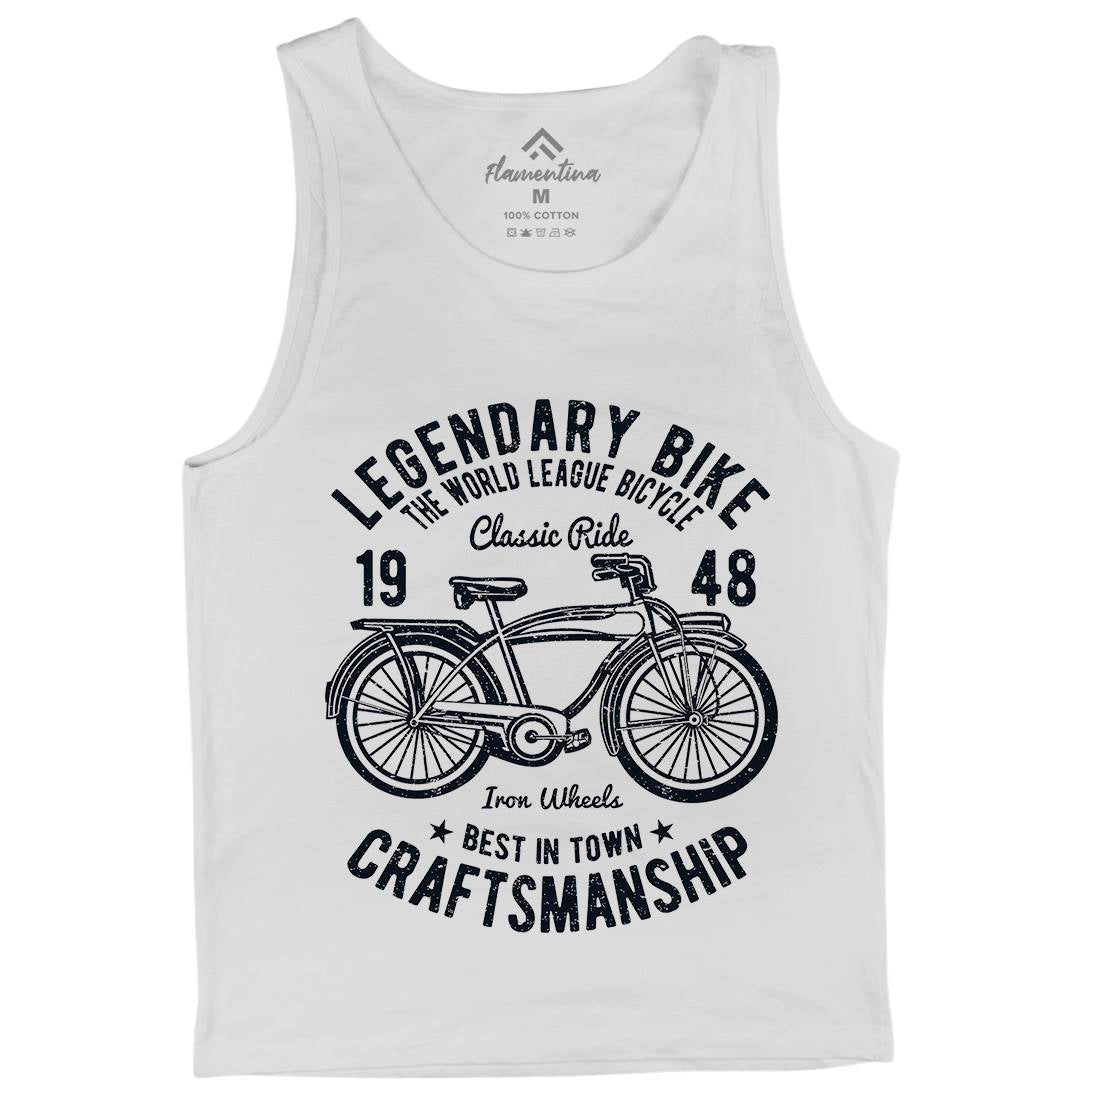 Classic Bicycle Mens Tank Top Vest Bikes A035